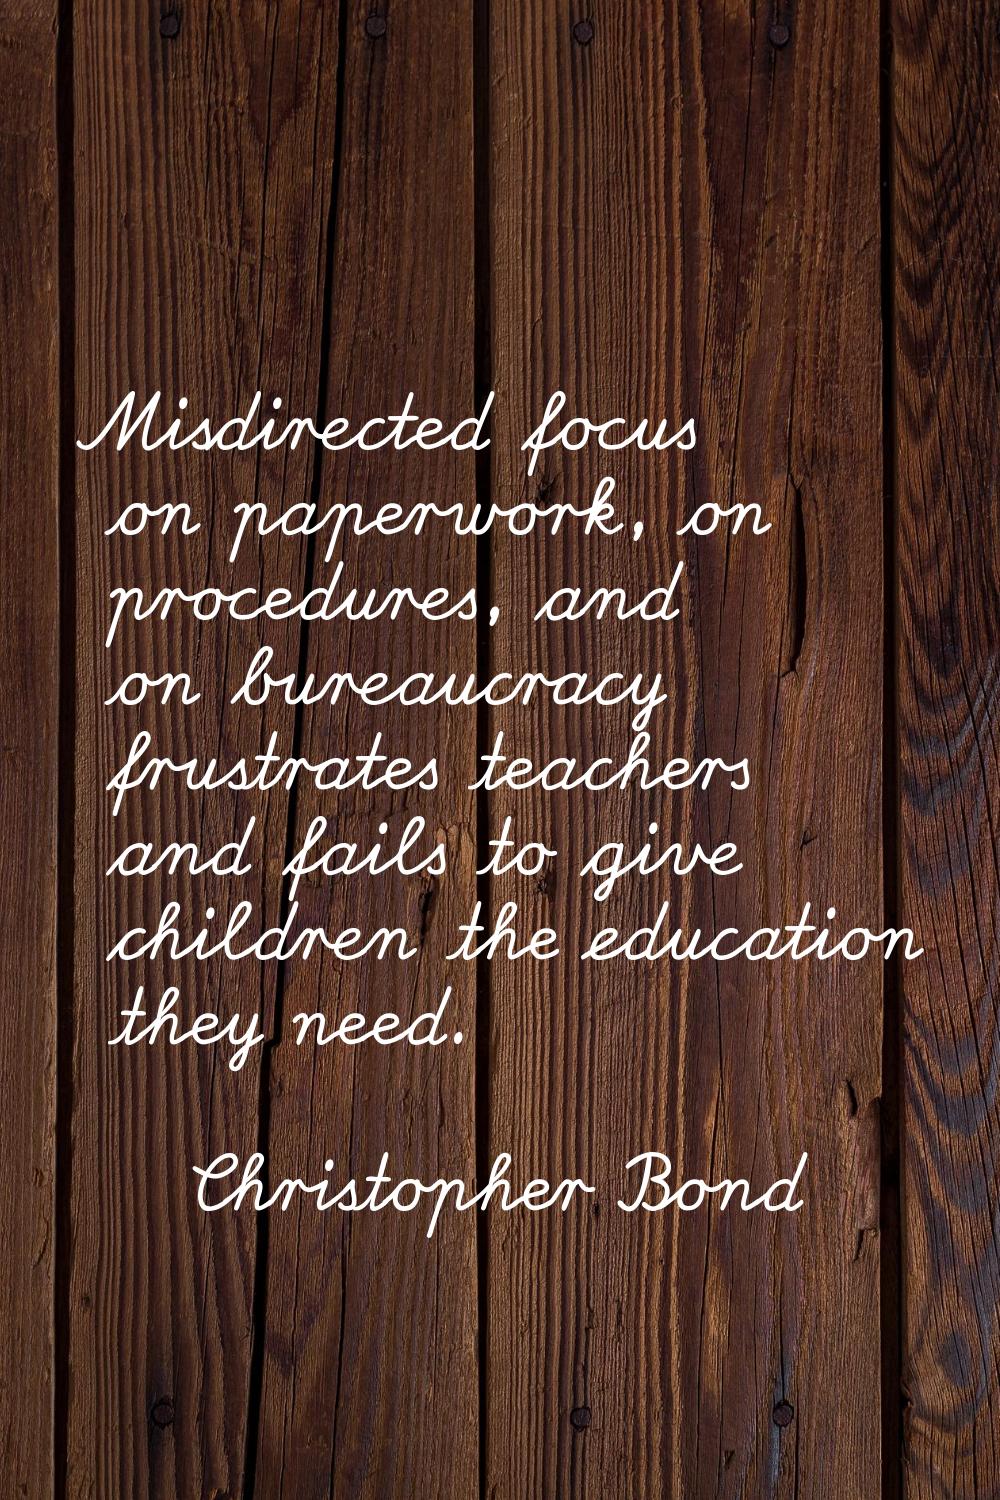 Misdirected focus on paperwork, on procedures, and on bureaucracy frustrates teachers and fails to 